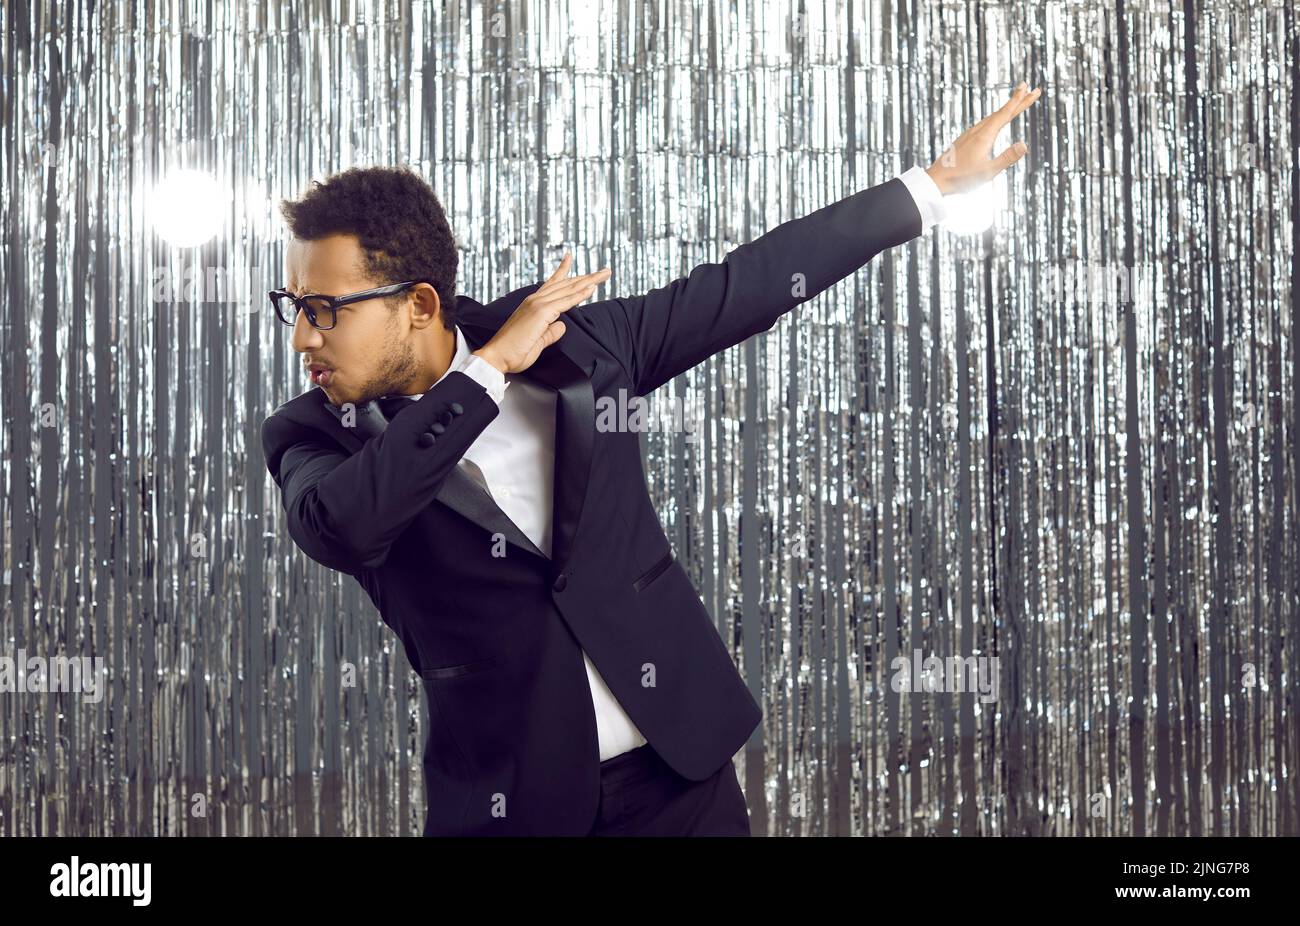 Happy confident black man in a tuxedo suit and glasses dancing and having fun at a party Stock Photo